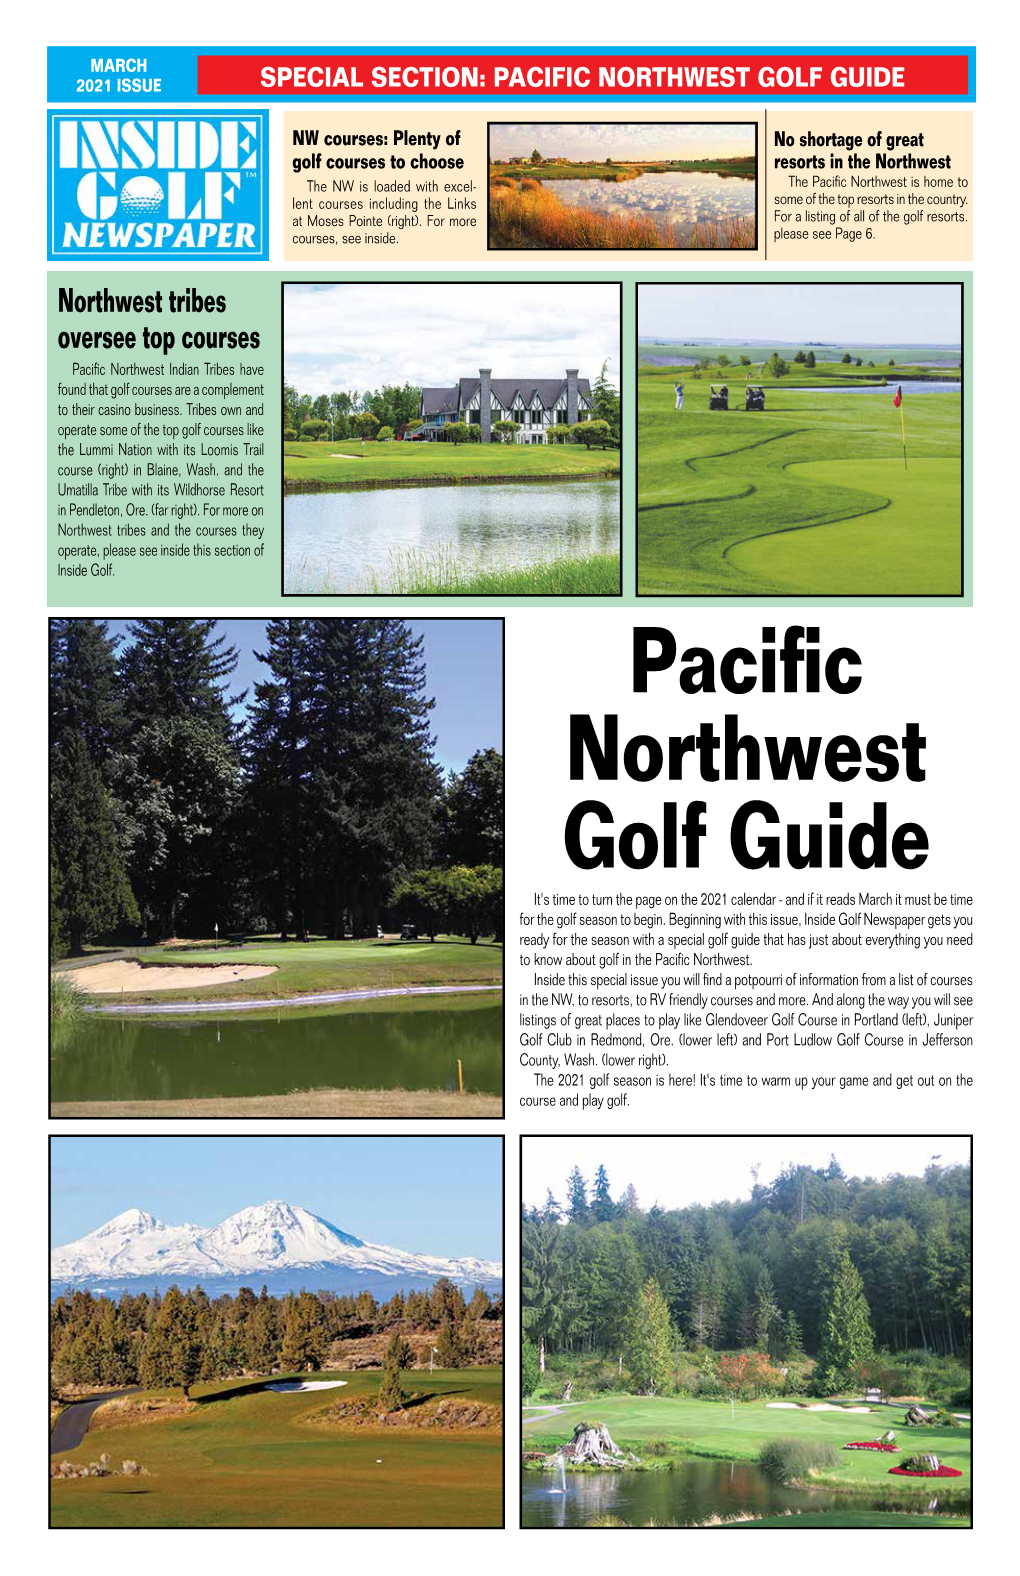 Northwest Tribes Oversee Top Courses Pacific Northwest Indian Tribes Have Found That Golf Courses Are a Complement to Their Casino Business